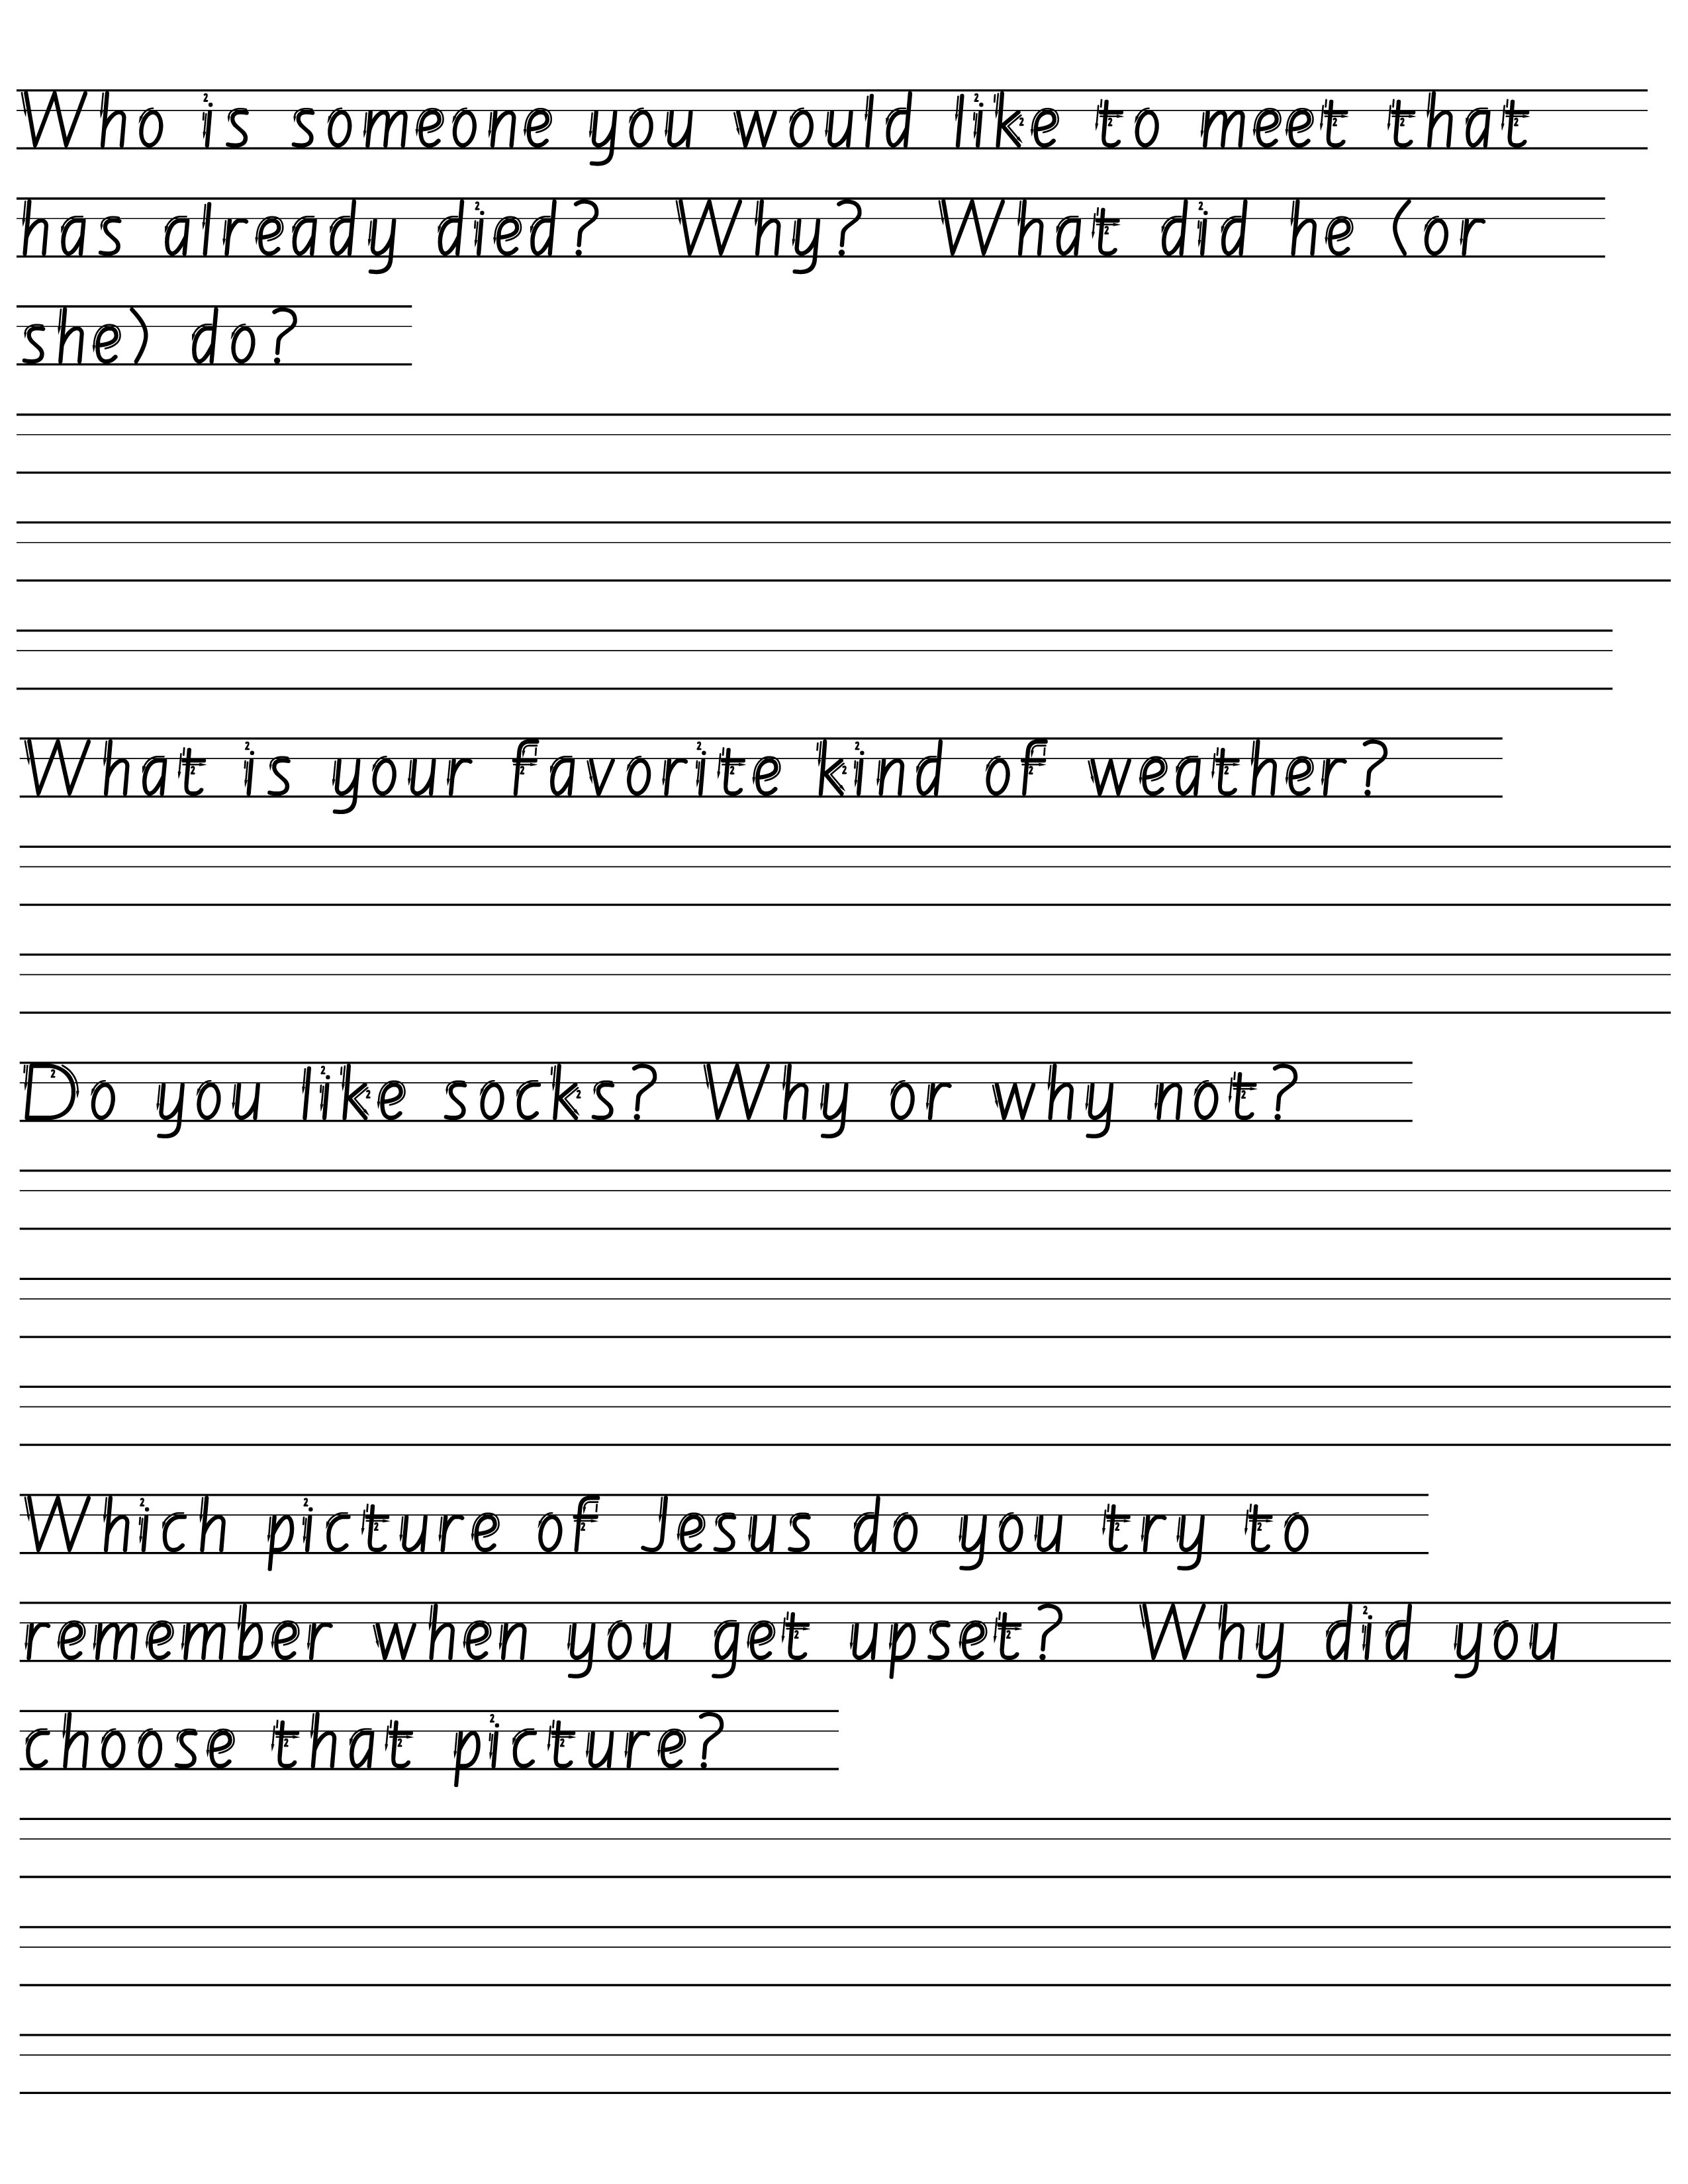 worksheets for creative writing